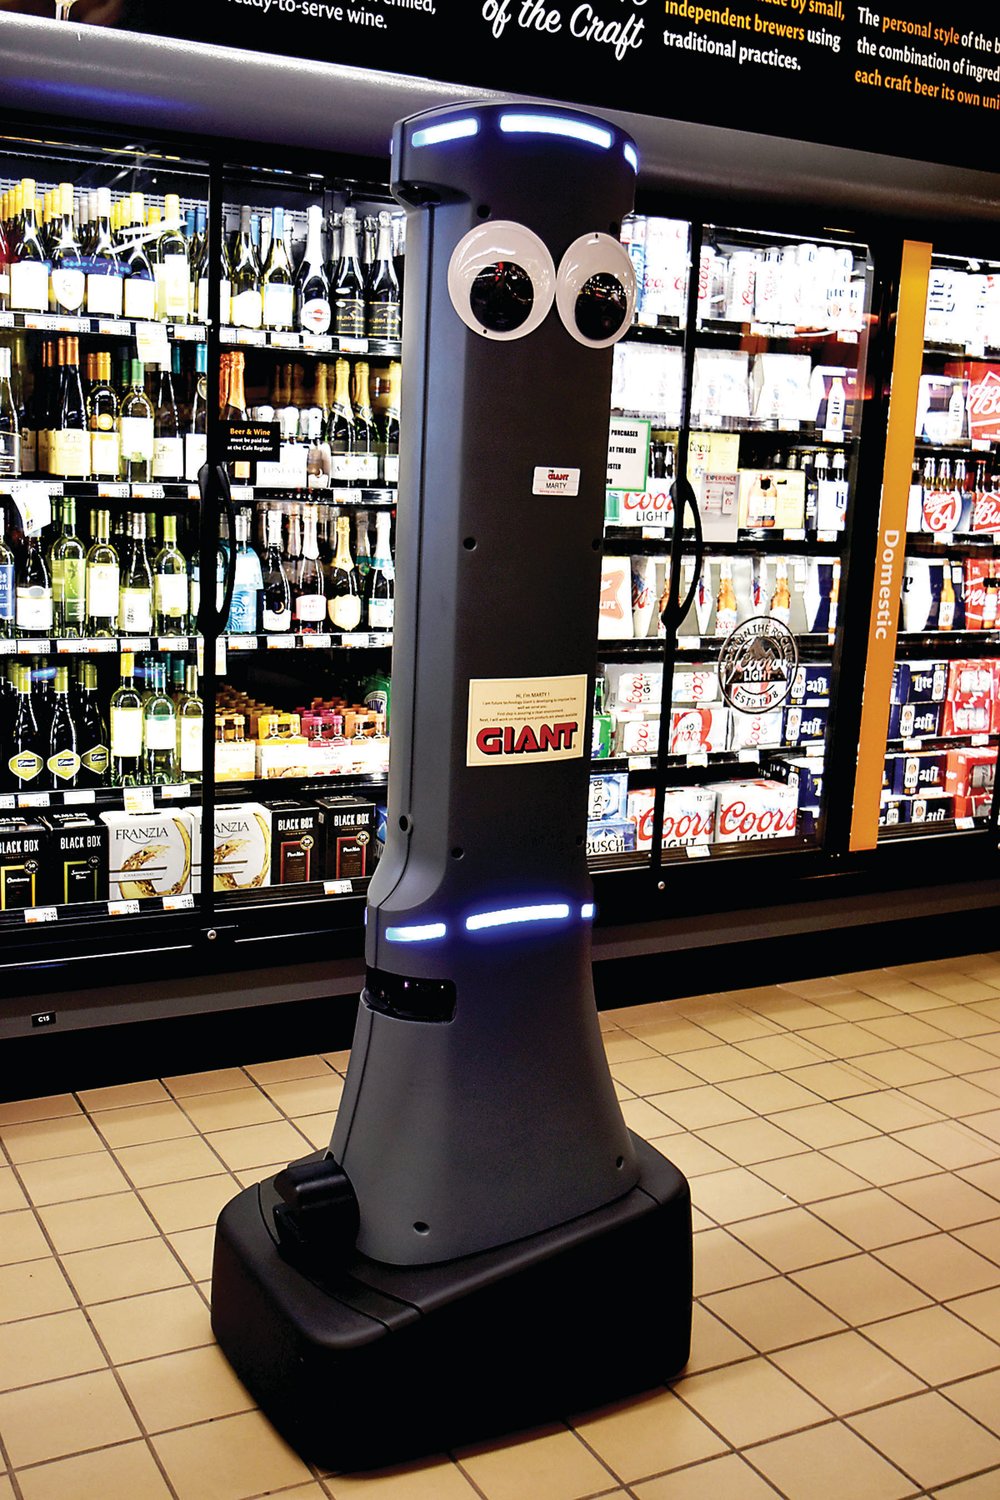 “Marty,” a tall gray robot with googly eyes, will soon be working alongside associates at Giant Food Stores.